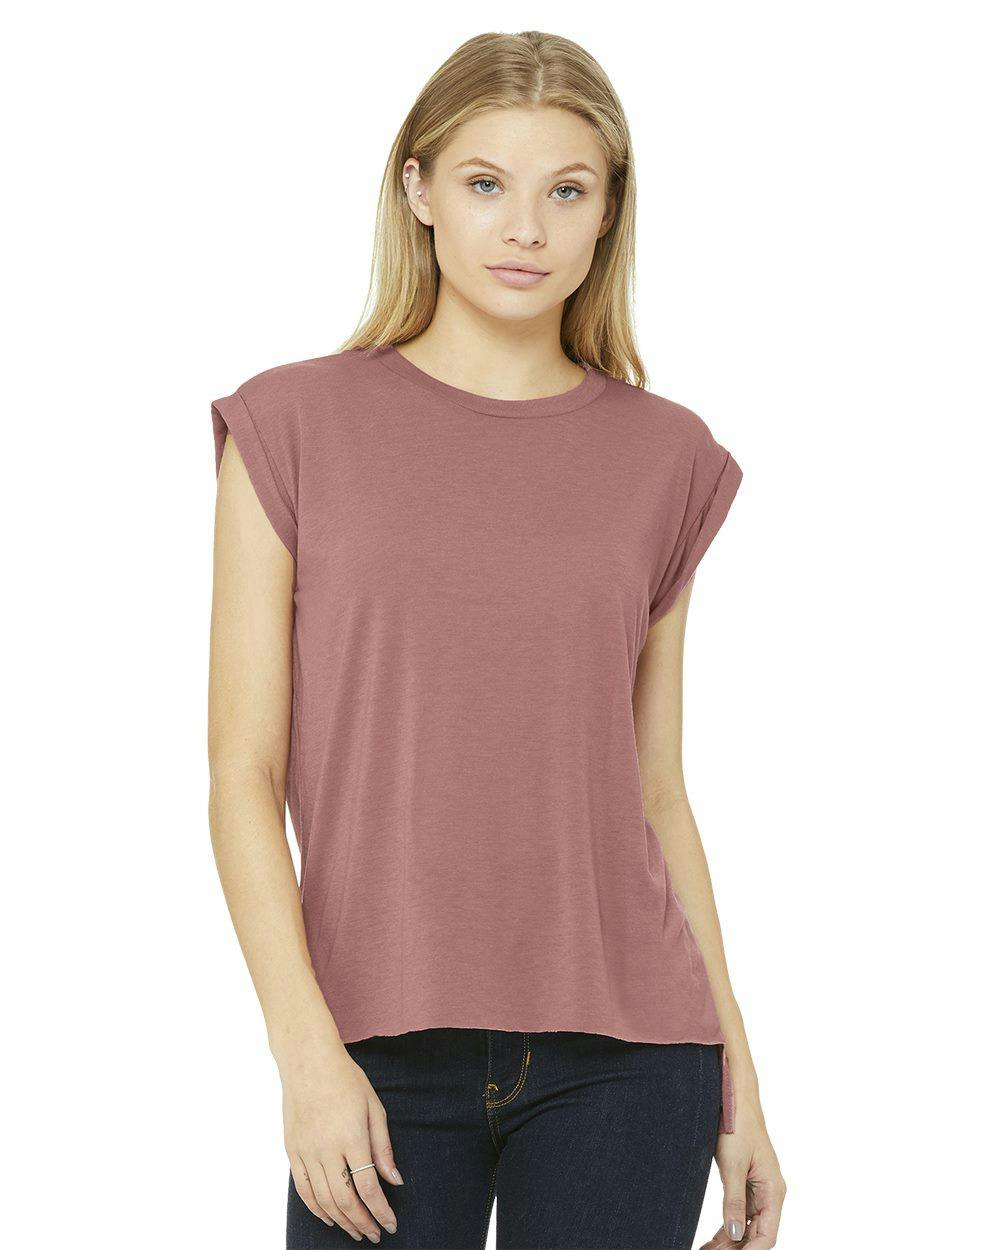 Image for Women’s Flowy Rolled Cuffs Muscle Tee - 8804